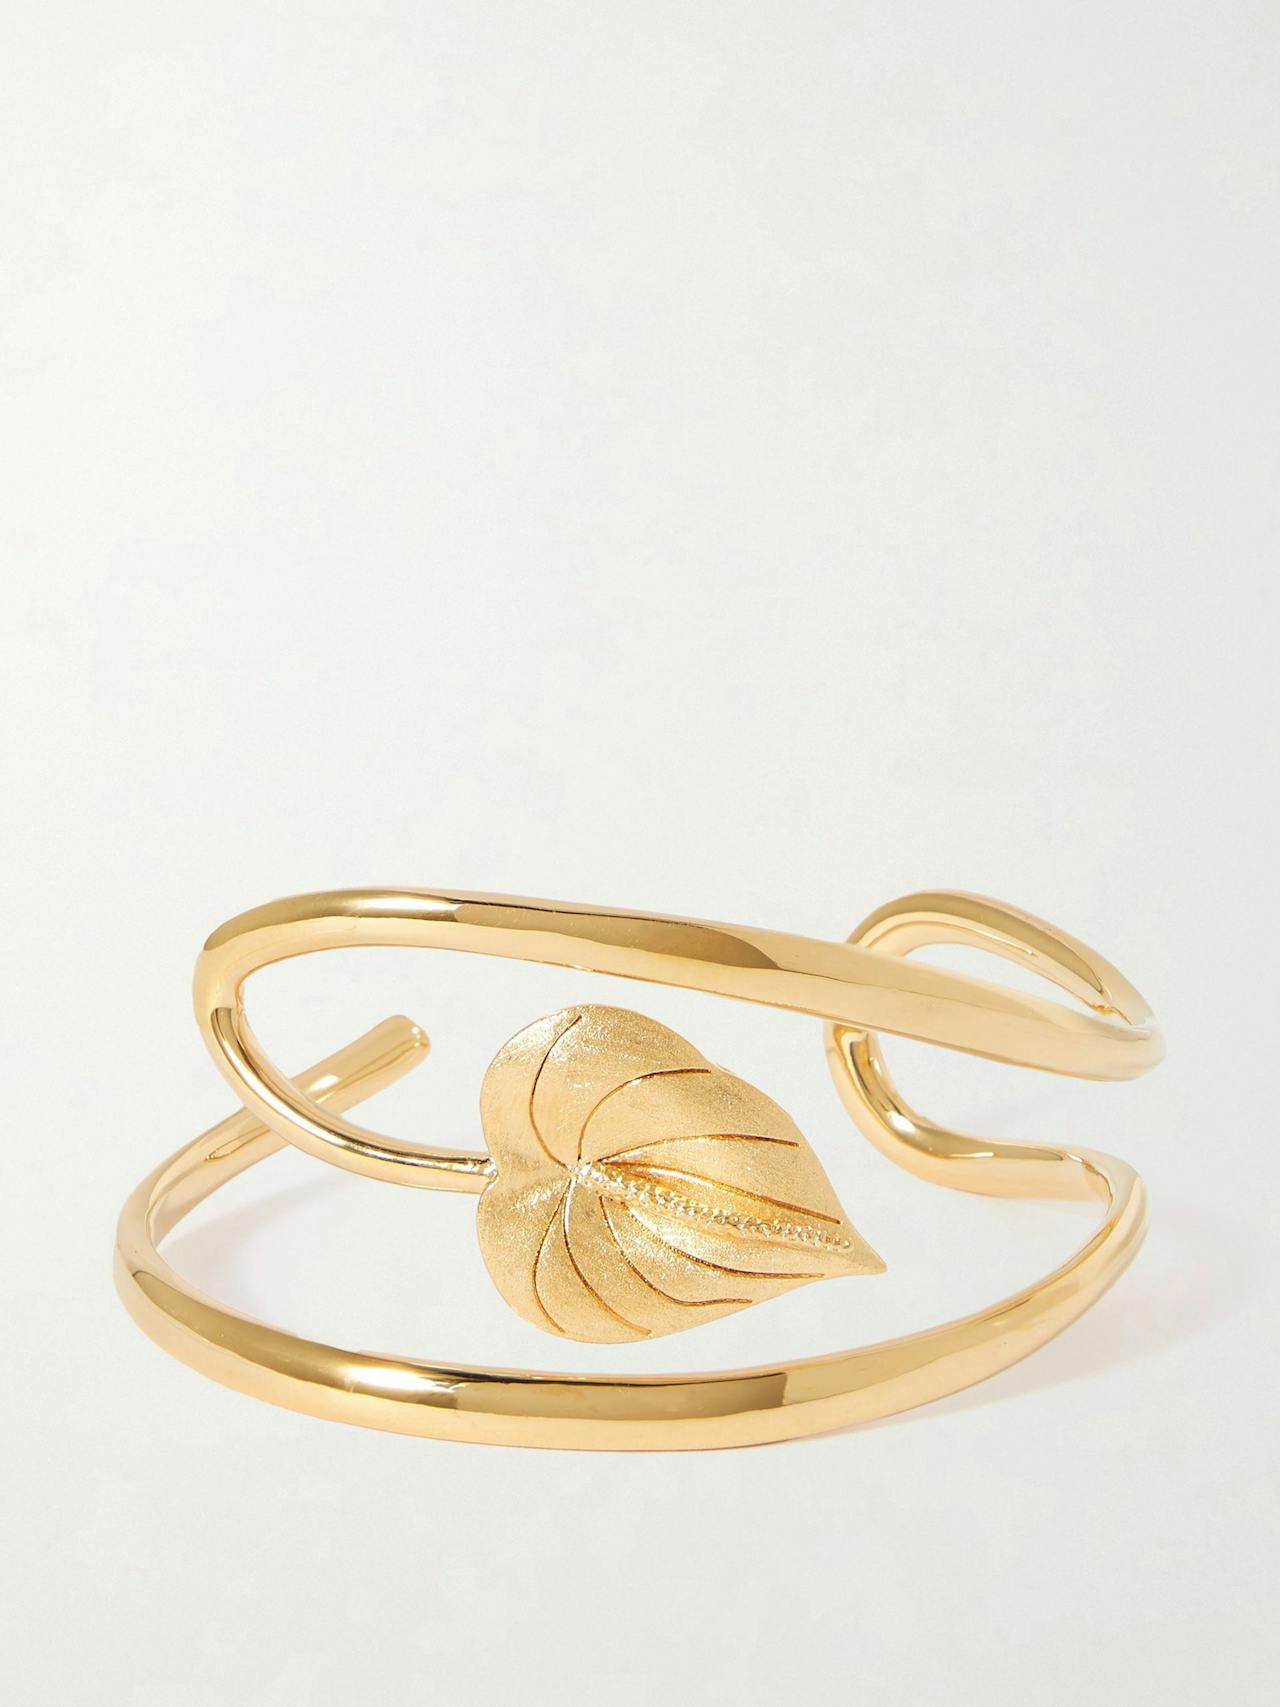 Gold-plated 'Fl-oral' bangle